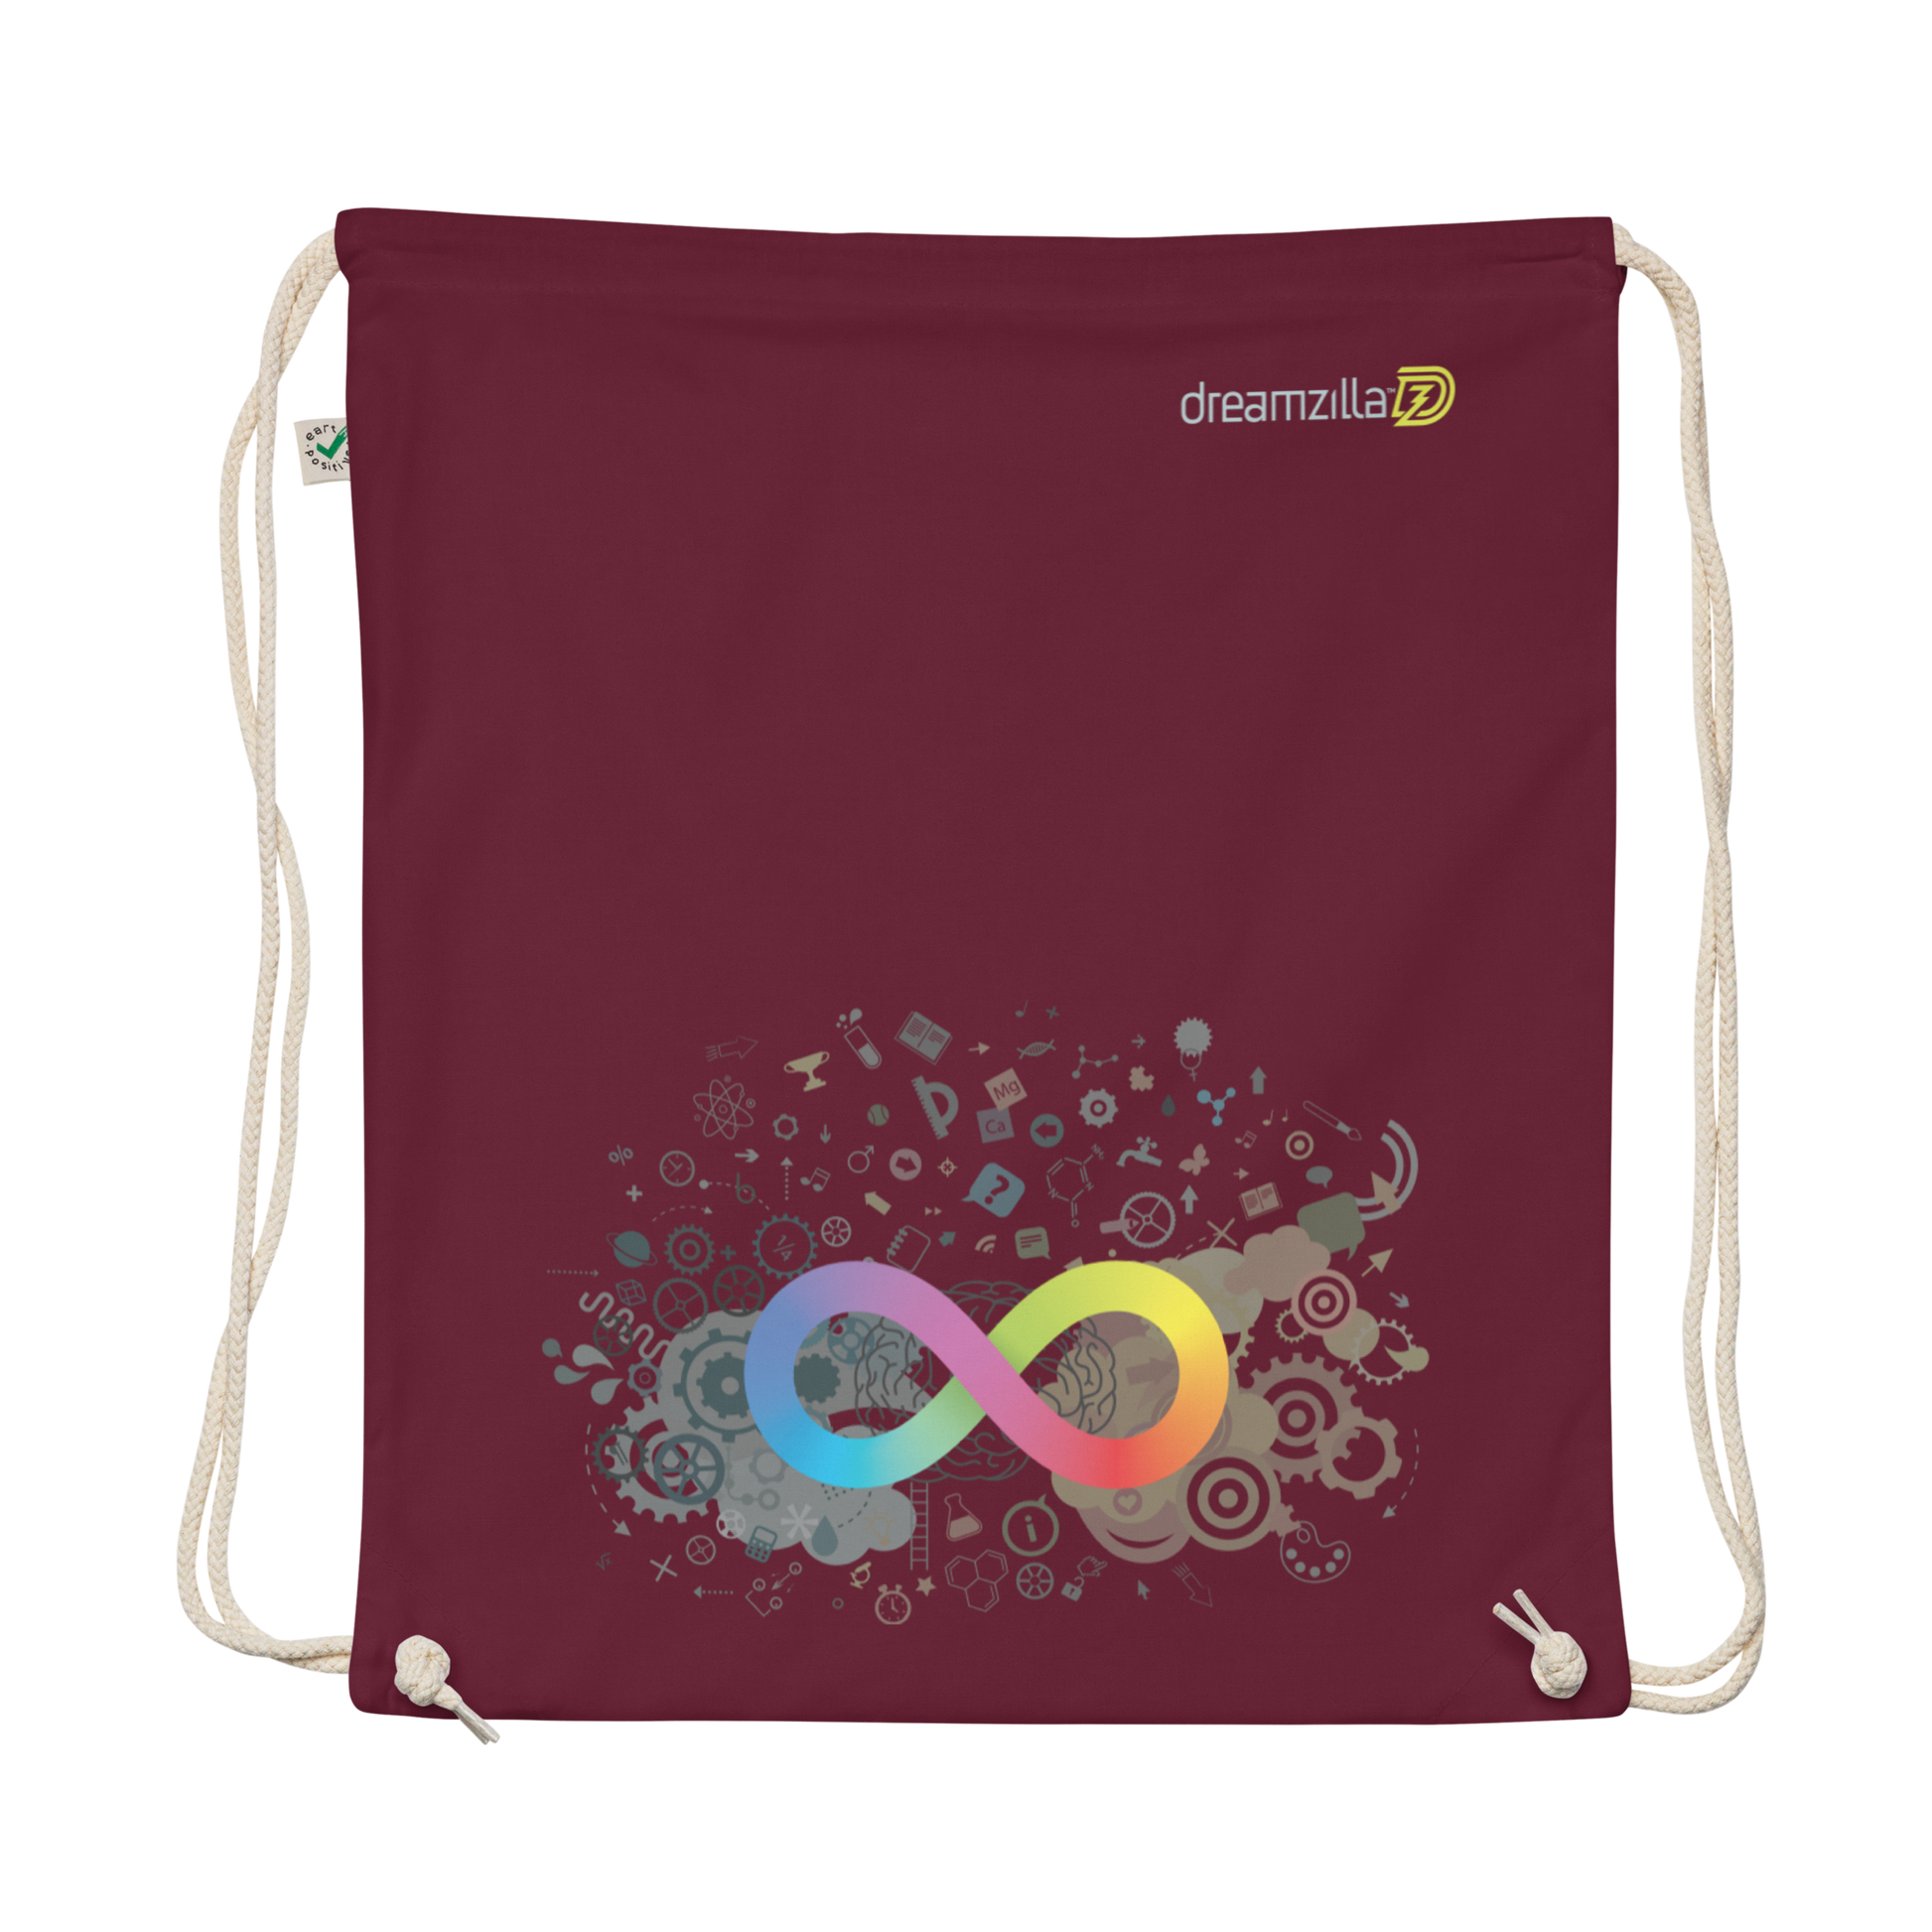 Flat view of Neurodiversity Rainbow Infinity EarthPositive Cotton Drawstring Bag in Burgundy